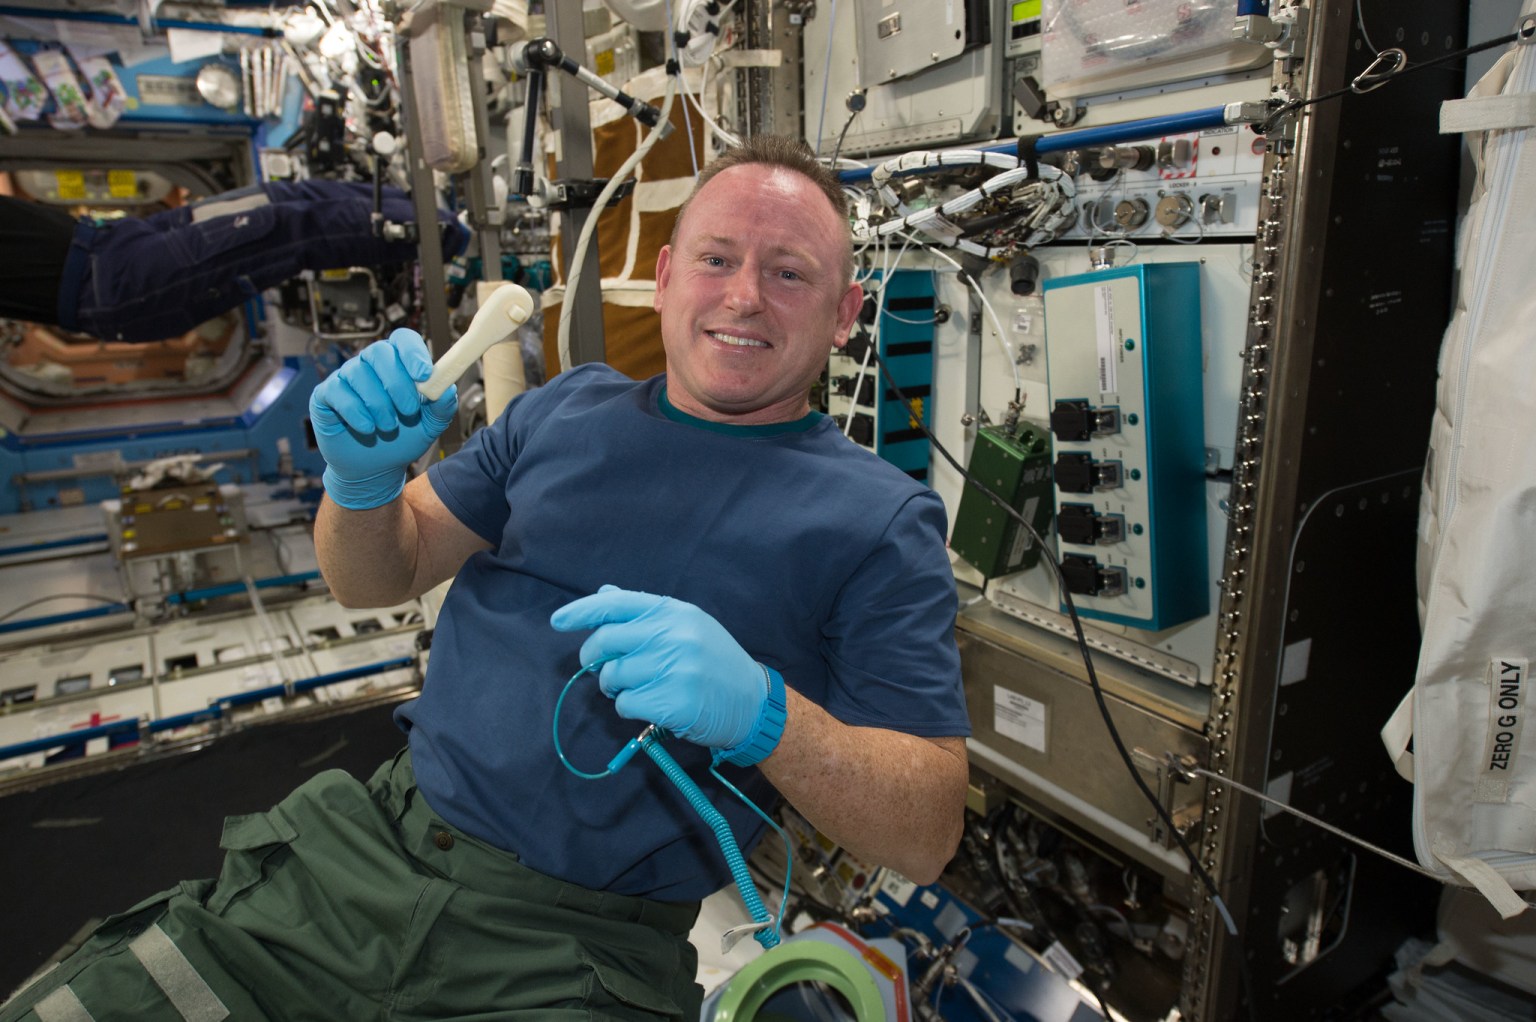 Astronaut Barry (Butch) Wilmore holds a 3-D printed ratchet wrench while on the International Space Station